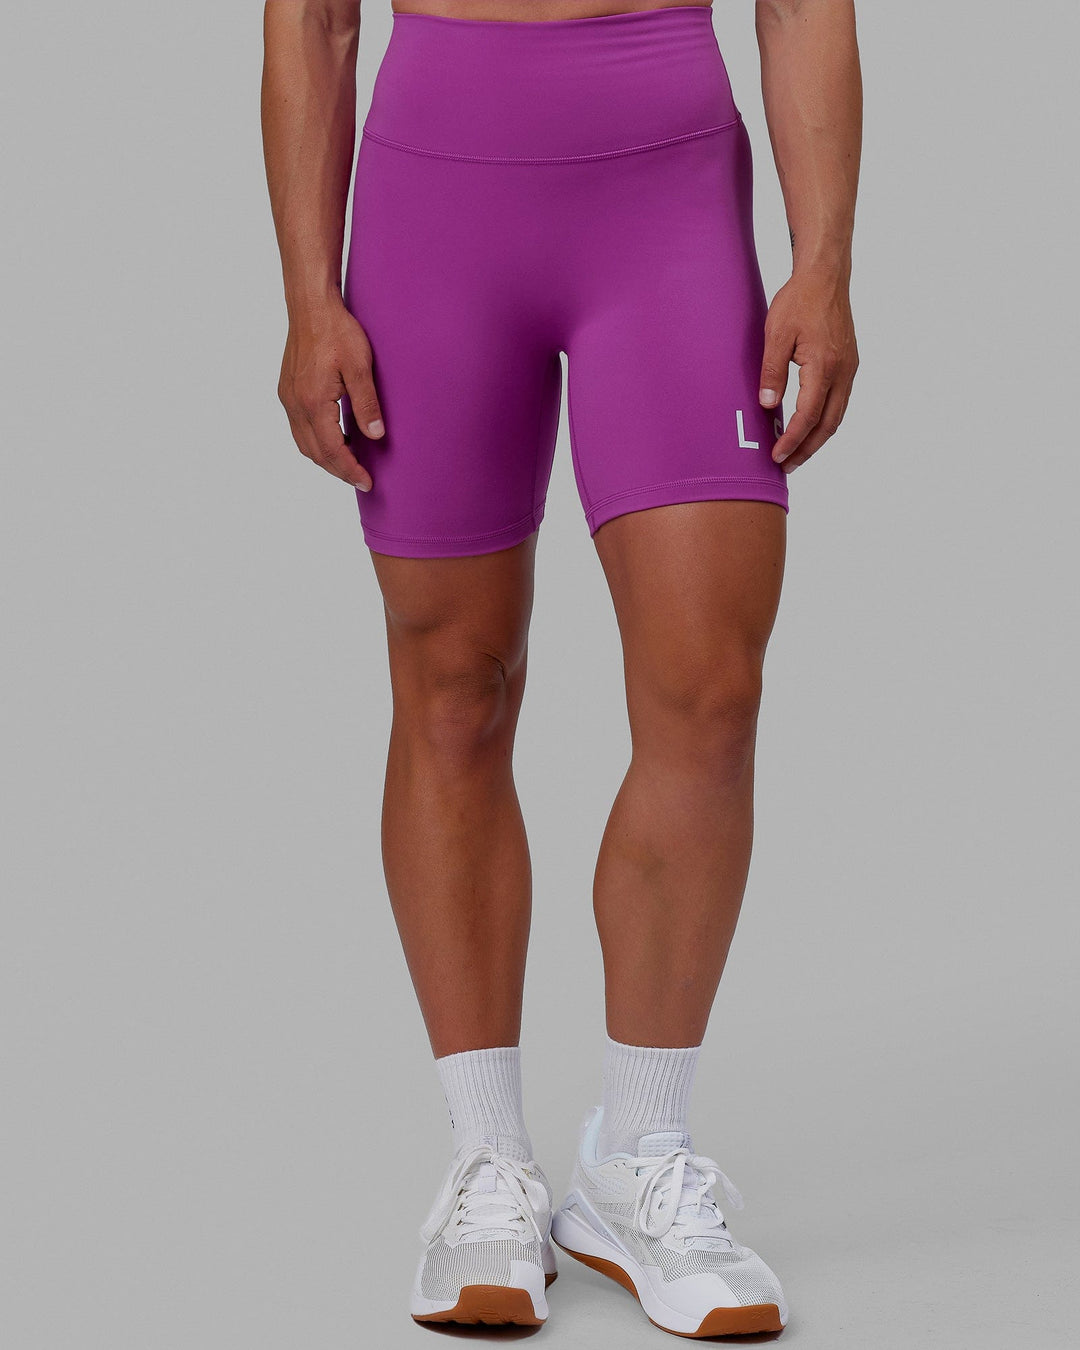 Woman wearing Evolved Mid Short Tights - Orchid-White